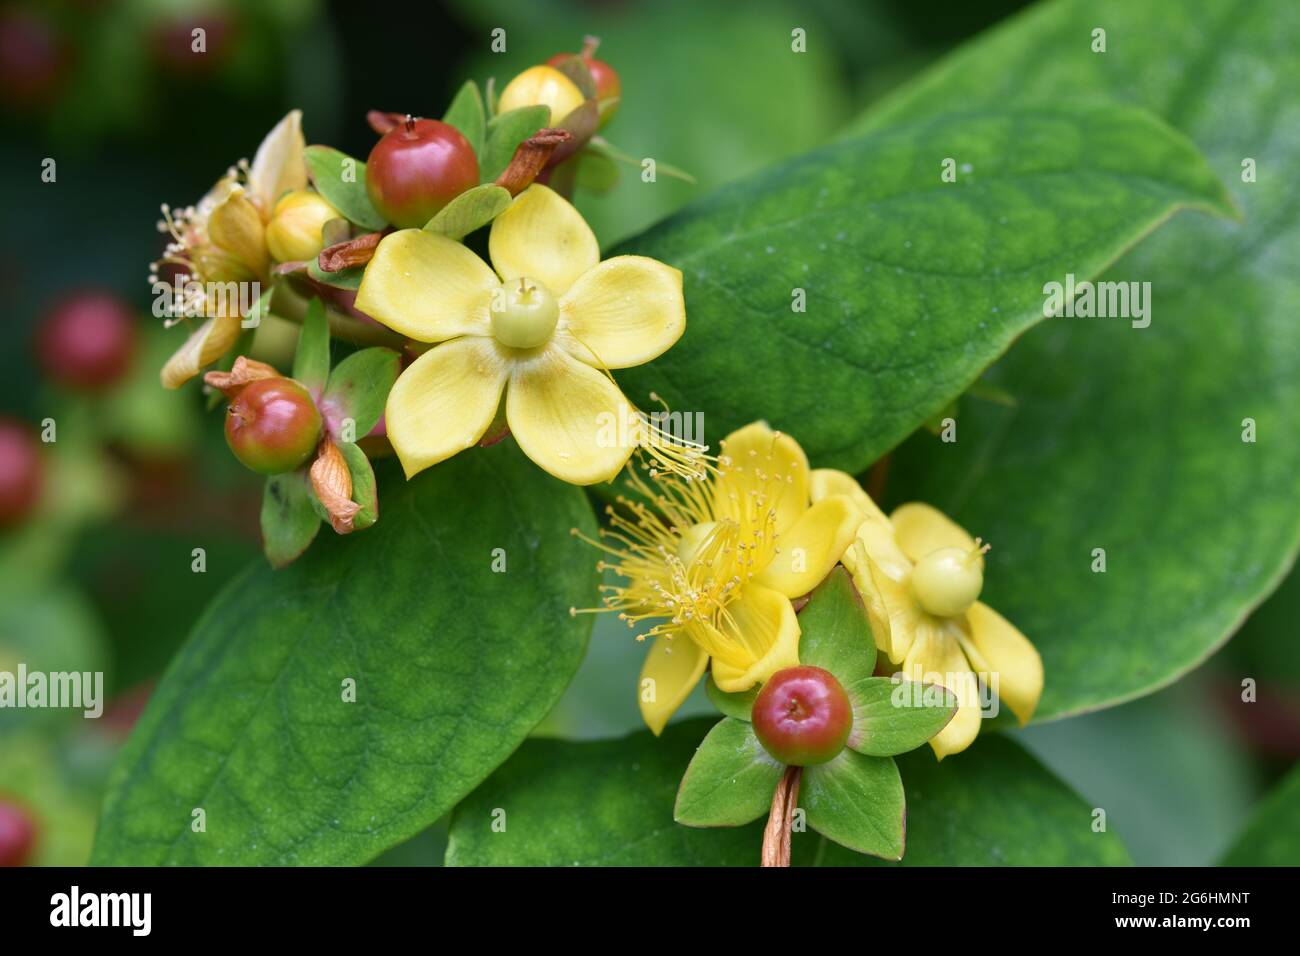 A Tutsan (Shrubby St. John's Wort) plant surrounded by beautiful greenery with a nature background Stock Photo